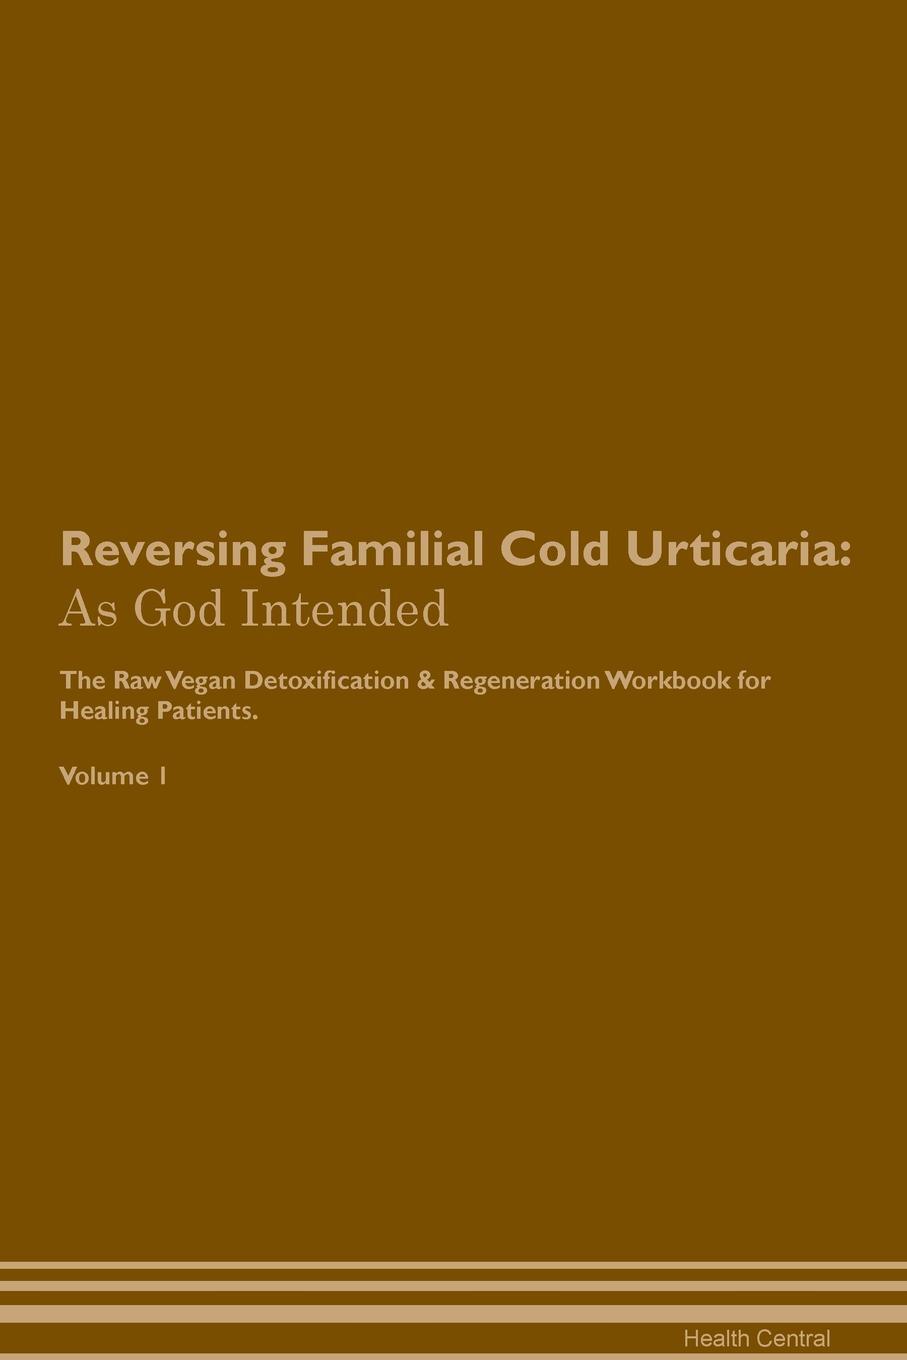 фото Reversing Familial Cold Urticaria. As God Intended The Raw Vegan Plant-Based Detoxification & Regeneration Workbook for Healing Patients. Volume 1